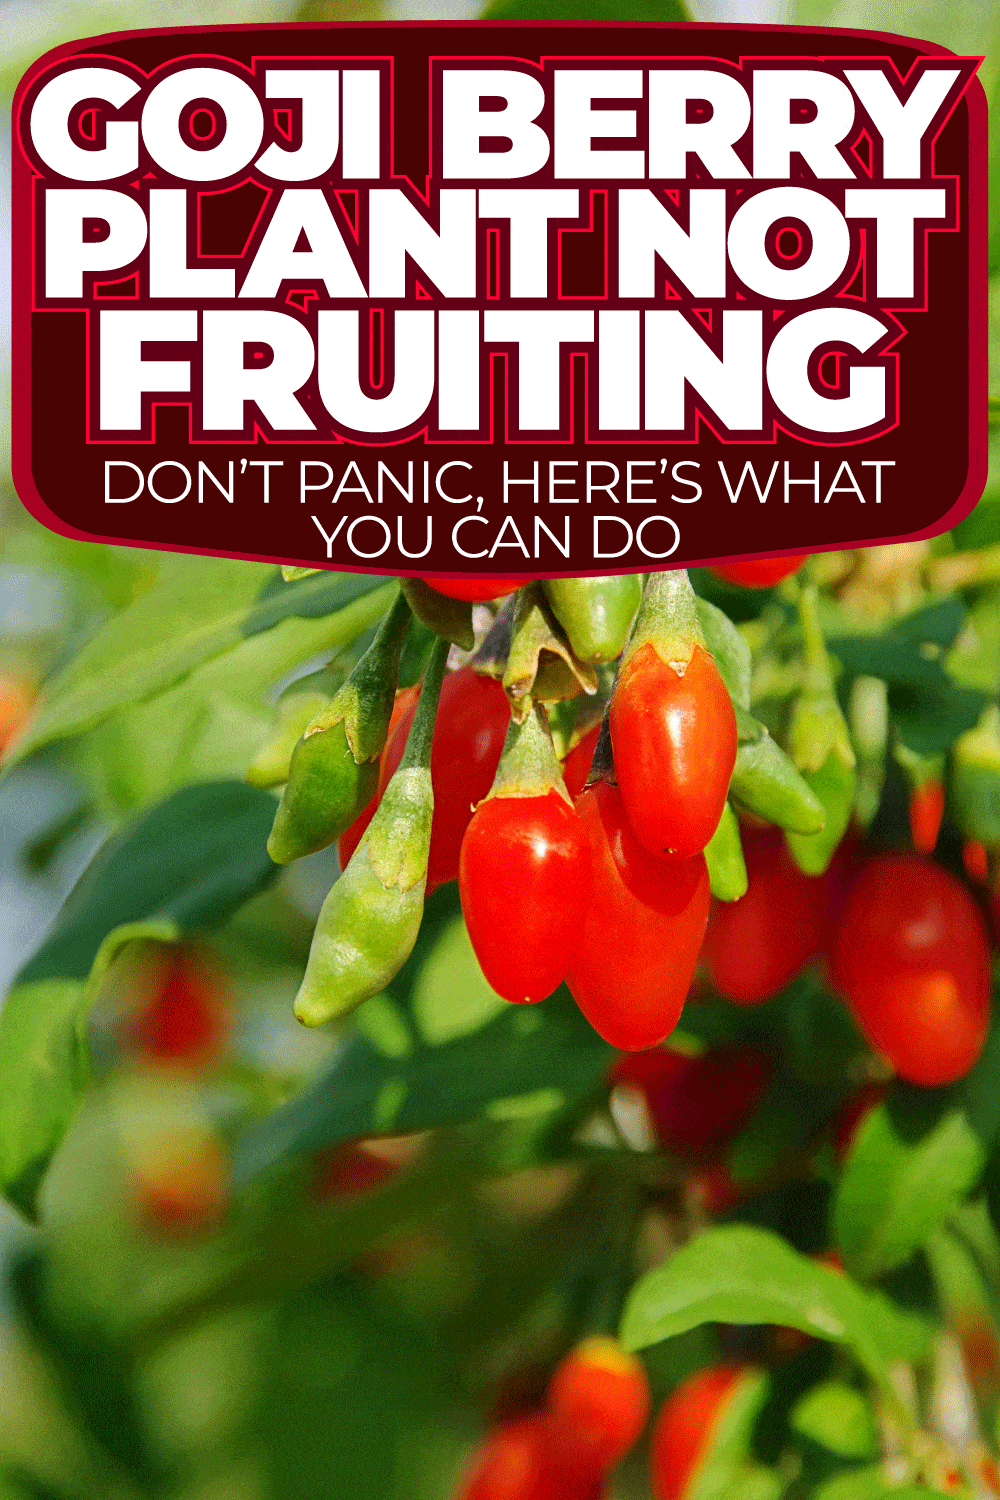 Goji Berry Plant Not Fruiting - Don’t Panic, Here’s What You Can Do